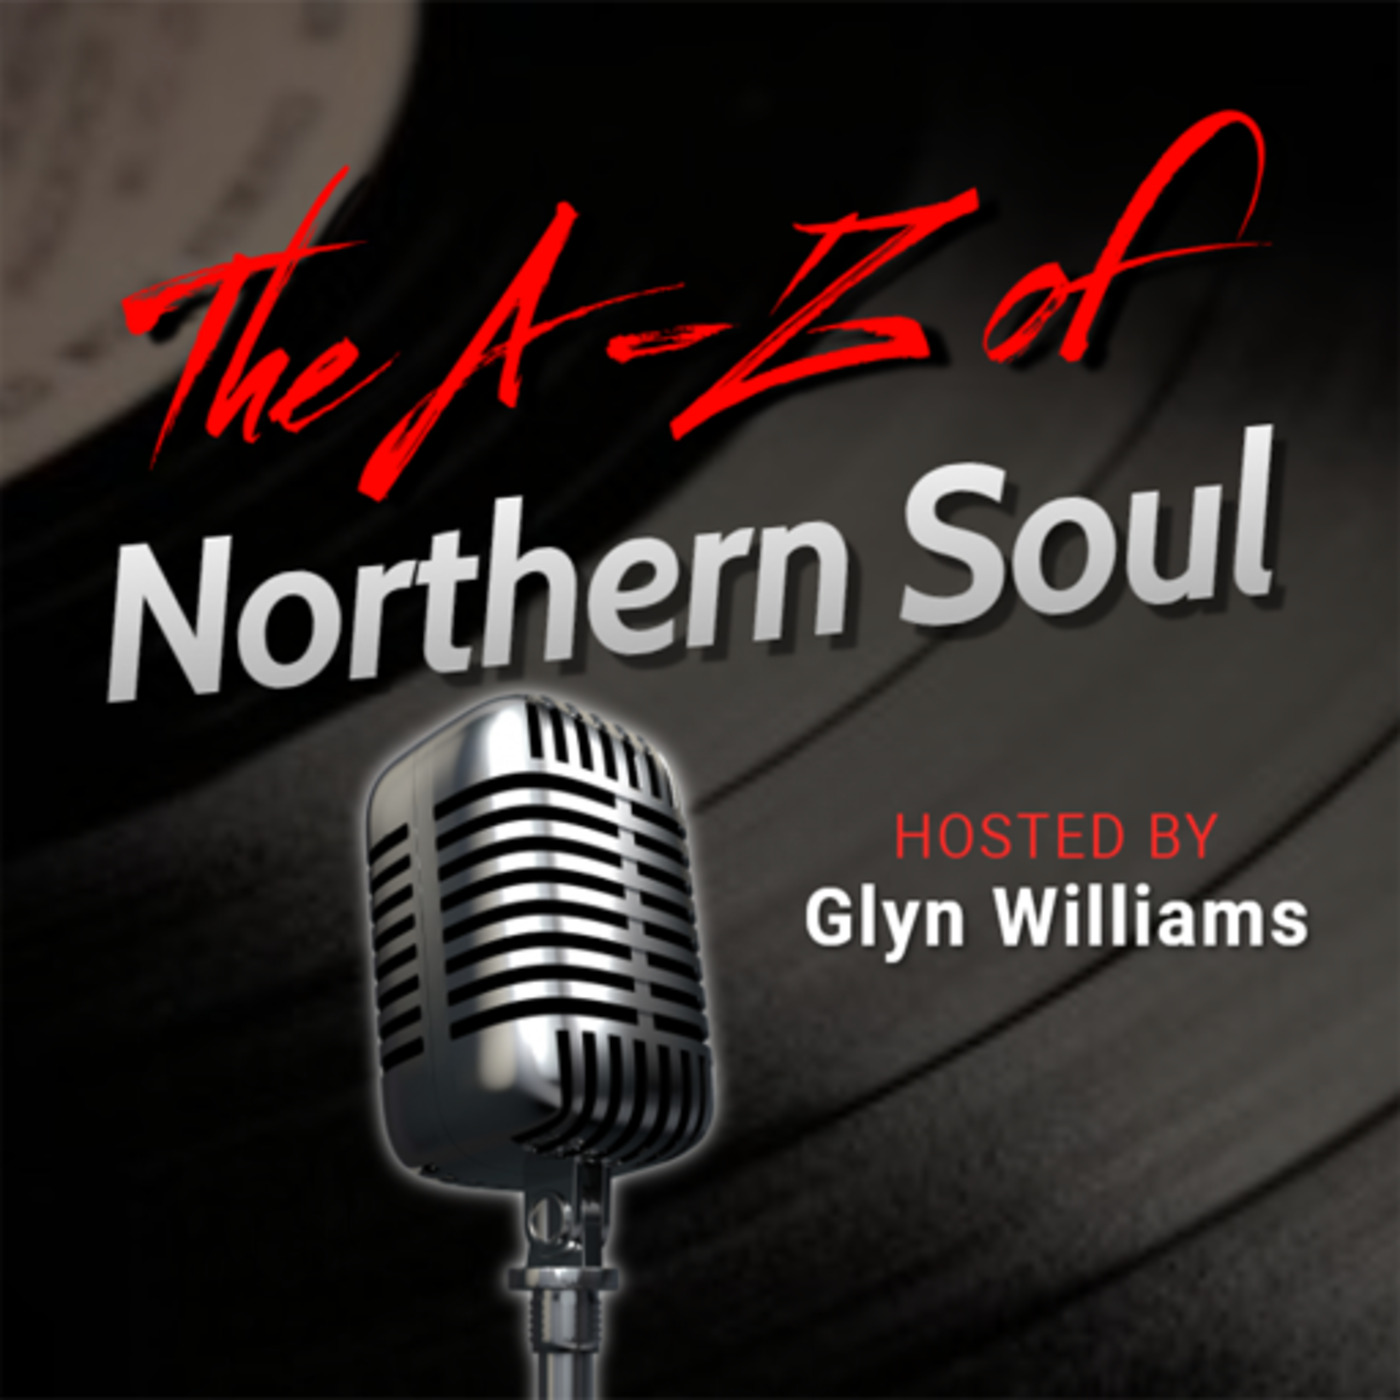 The A-Z of Northern Soul E032